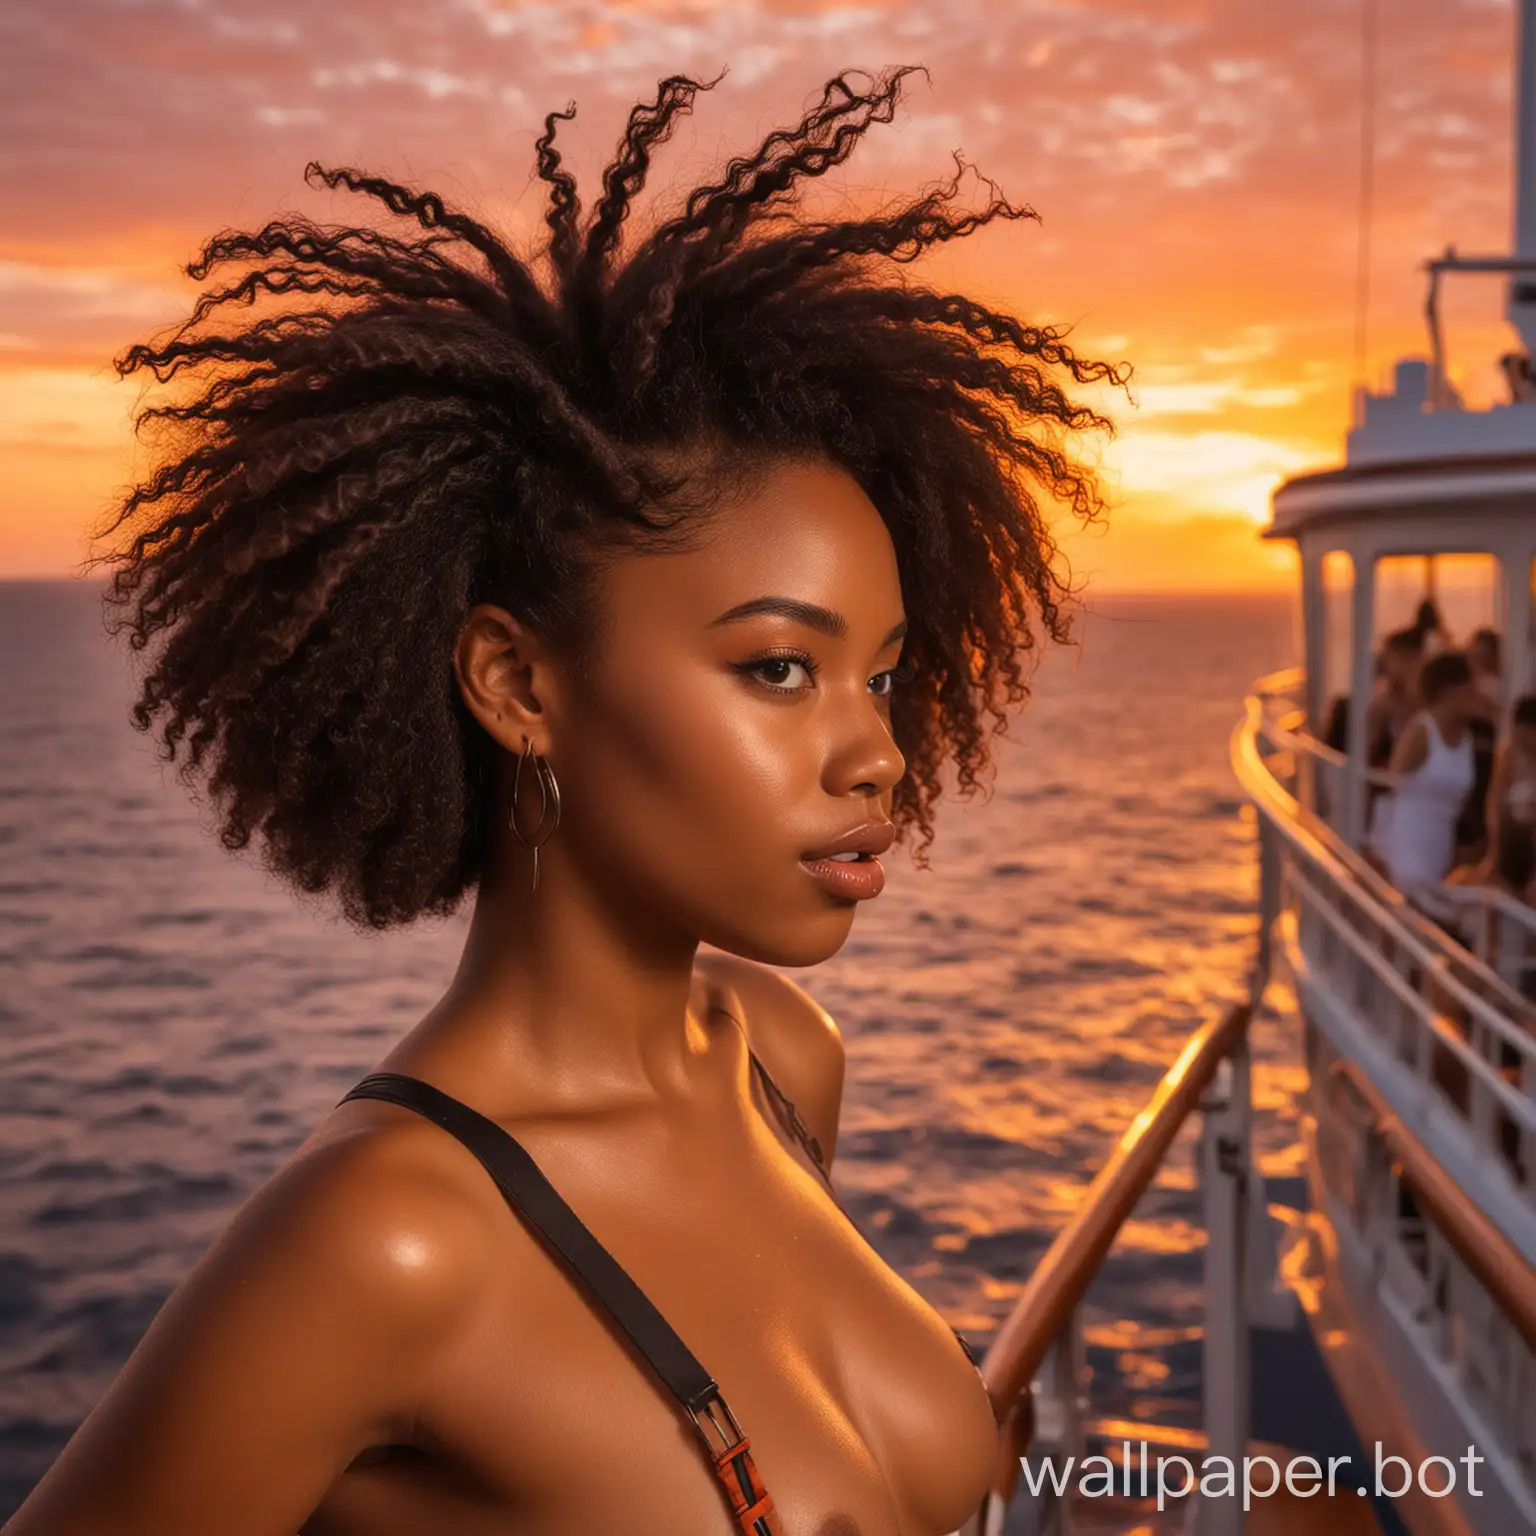 Luxury-Cruise-Sunset-Black-Brazilian-Girl-in-Vibrant-Sunset-with-Blowing-Hair